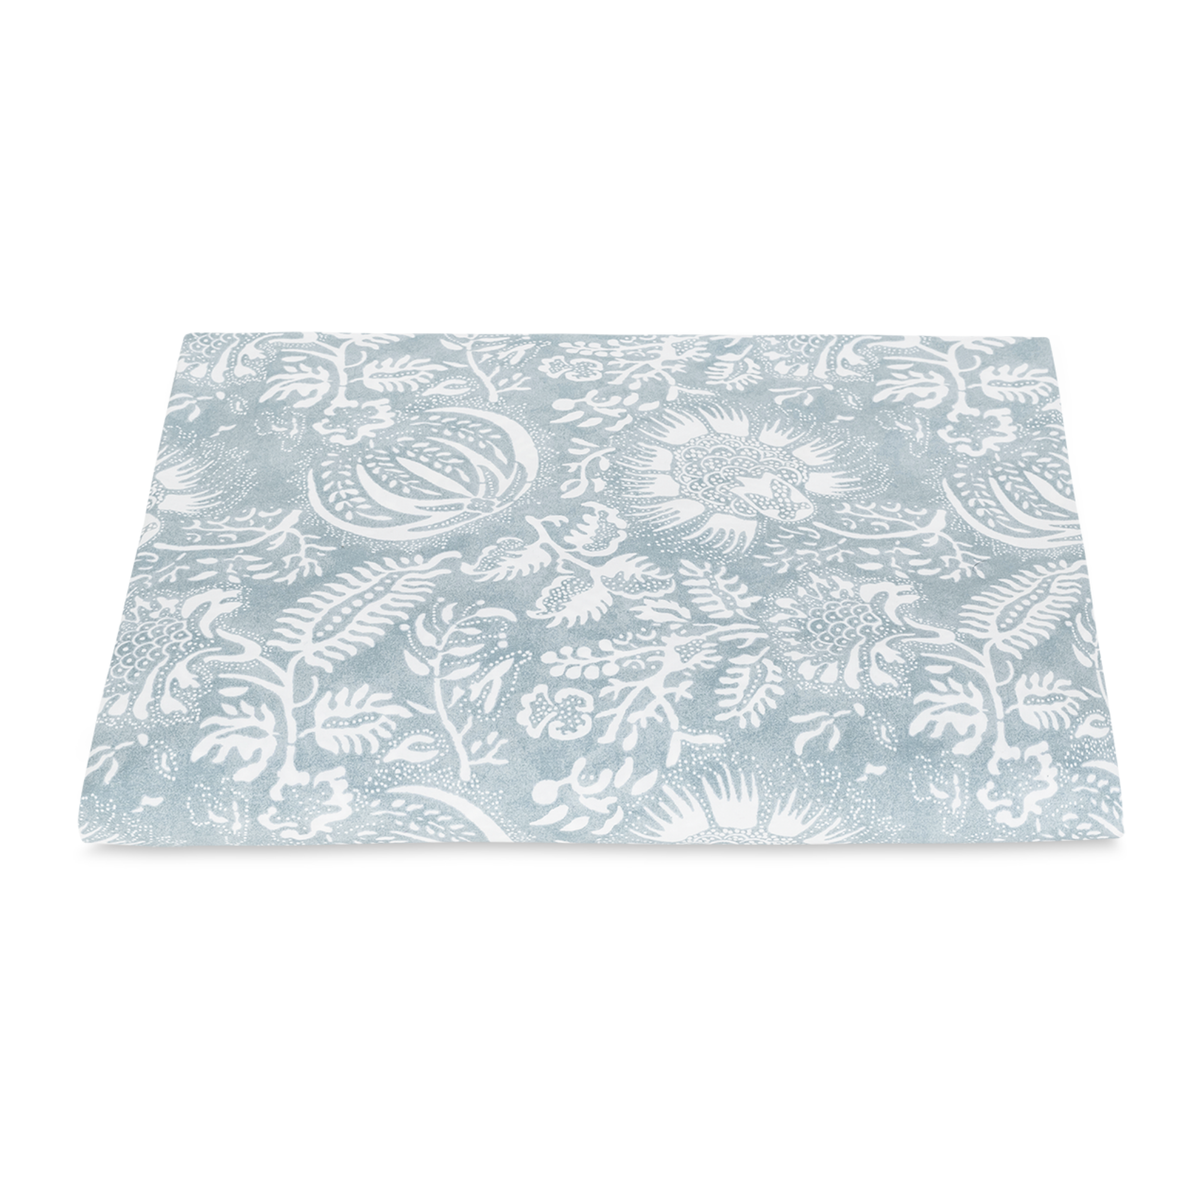 Folded Fitted Sheet of Matouk Granada Bedding in Hazy Blue Color